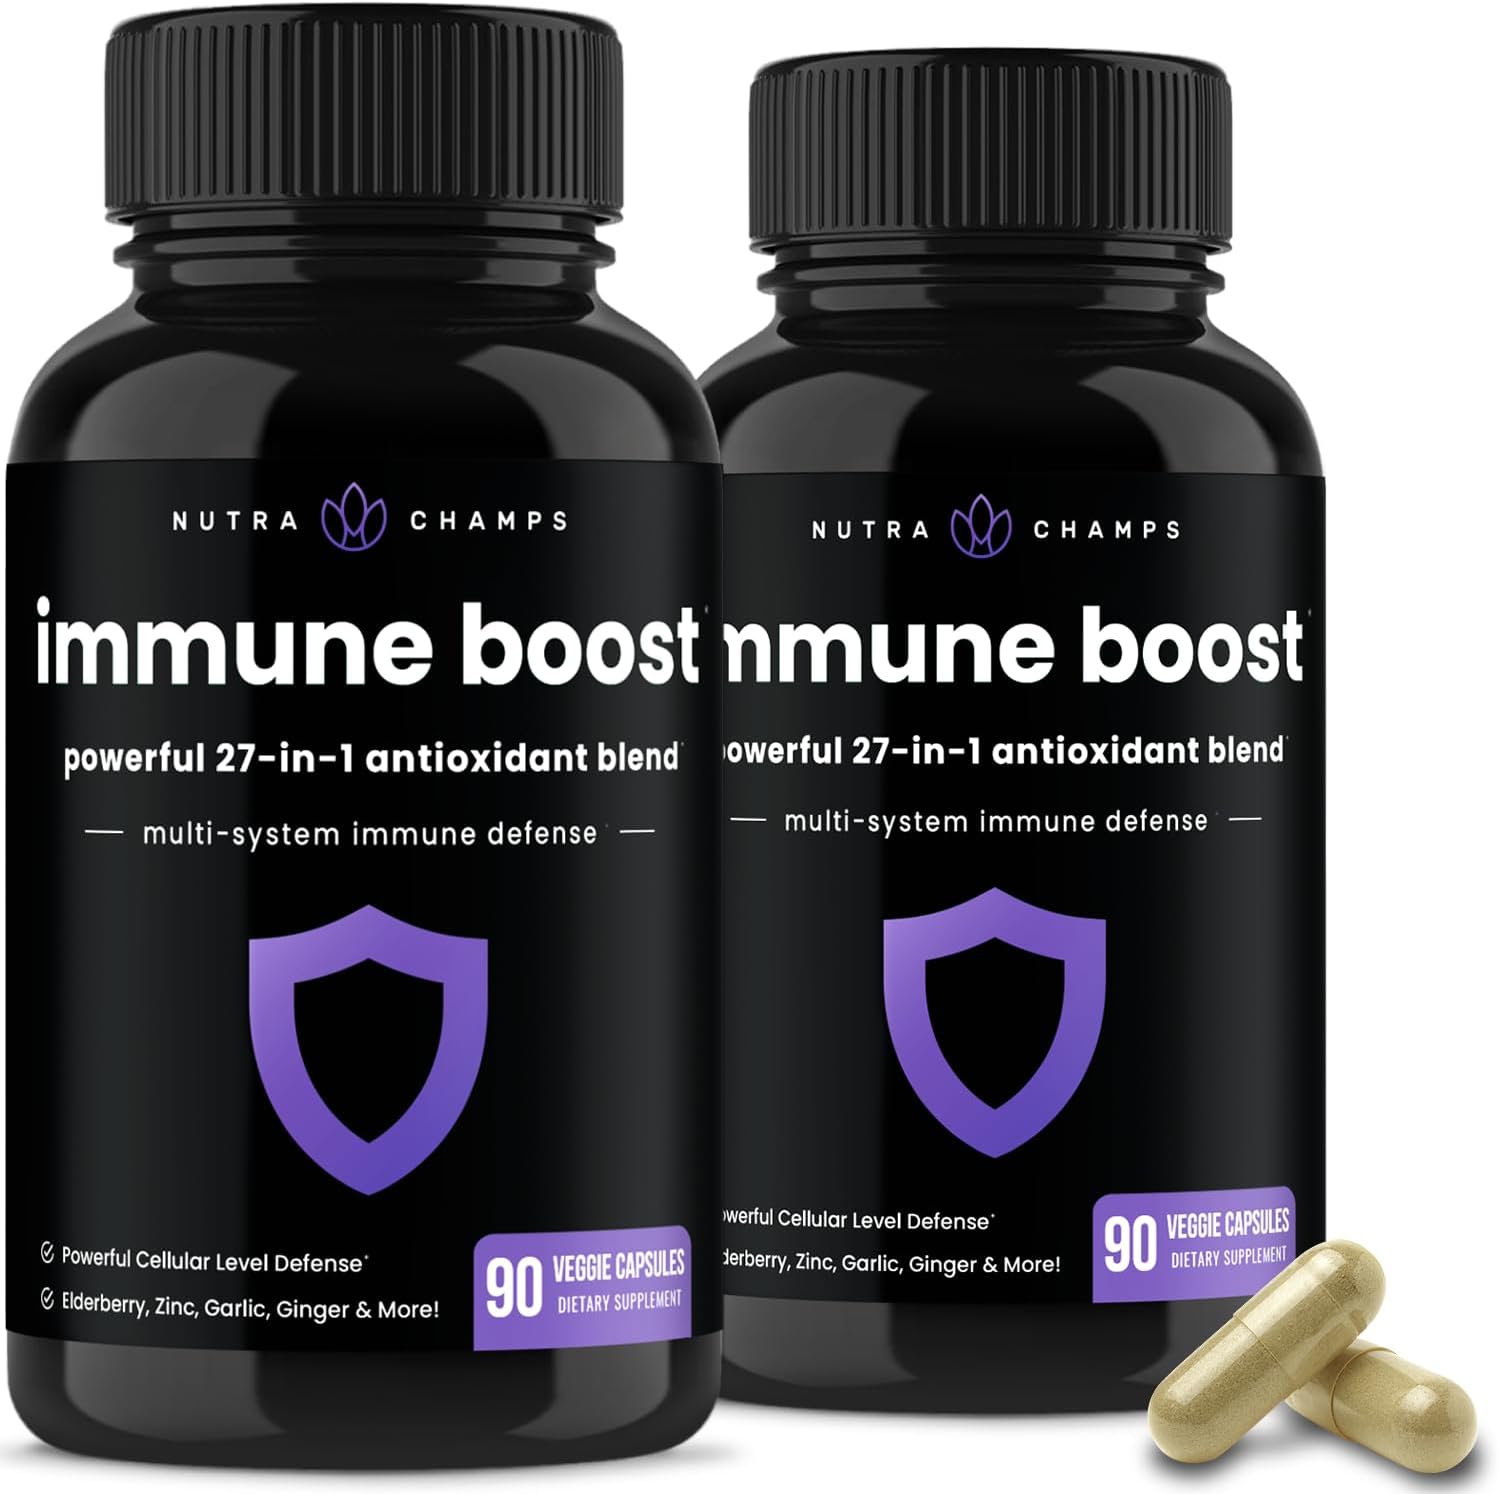 27 in 1 Immune Support Supplement | Antioxidant Immune Boosters for Ad